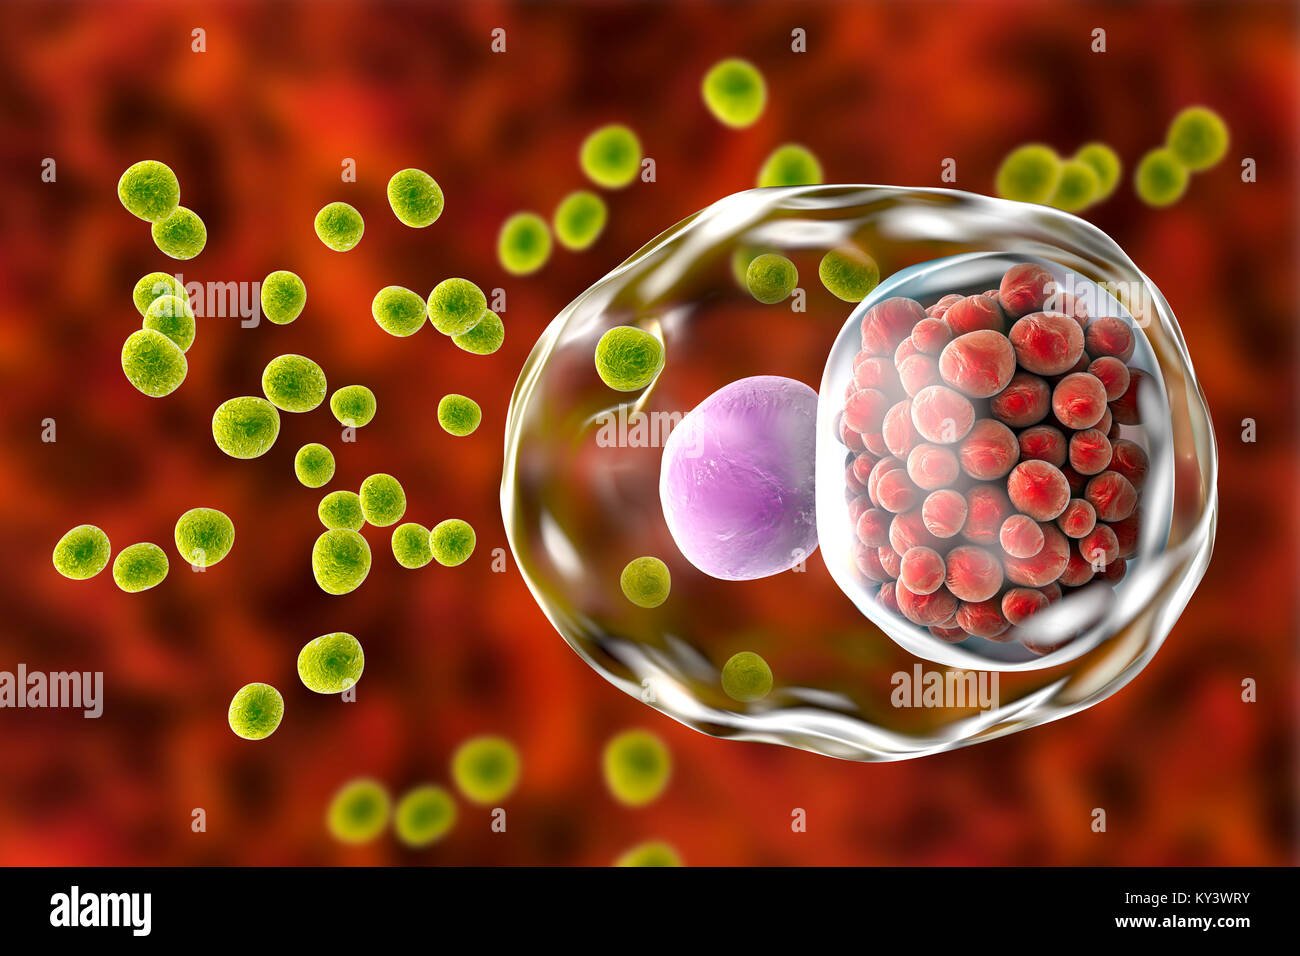 Chlamydia infection. Computer illustration of a cell ...